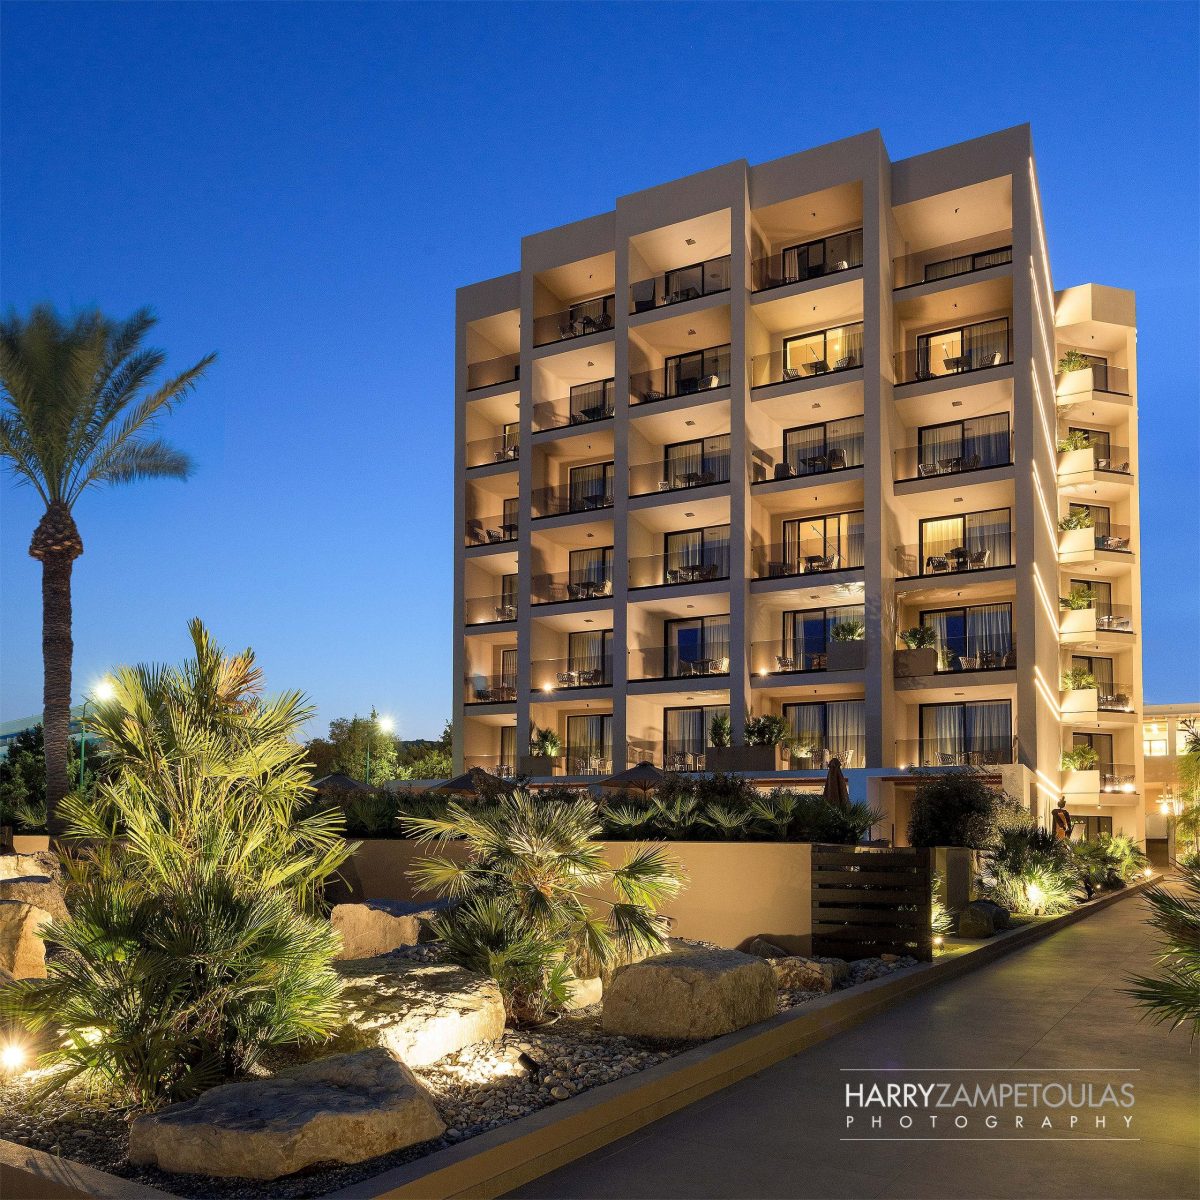 exterior-night-2-1200x1200 Ammades All Suites Beach Hotel - Hotel Photography by Harry Zampetoulas 